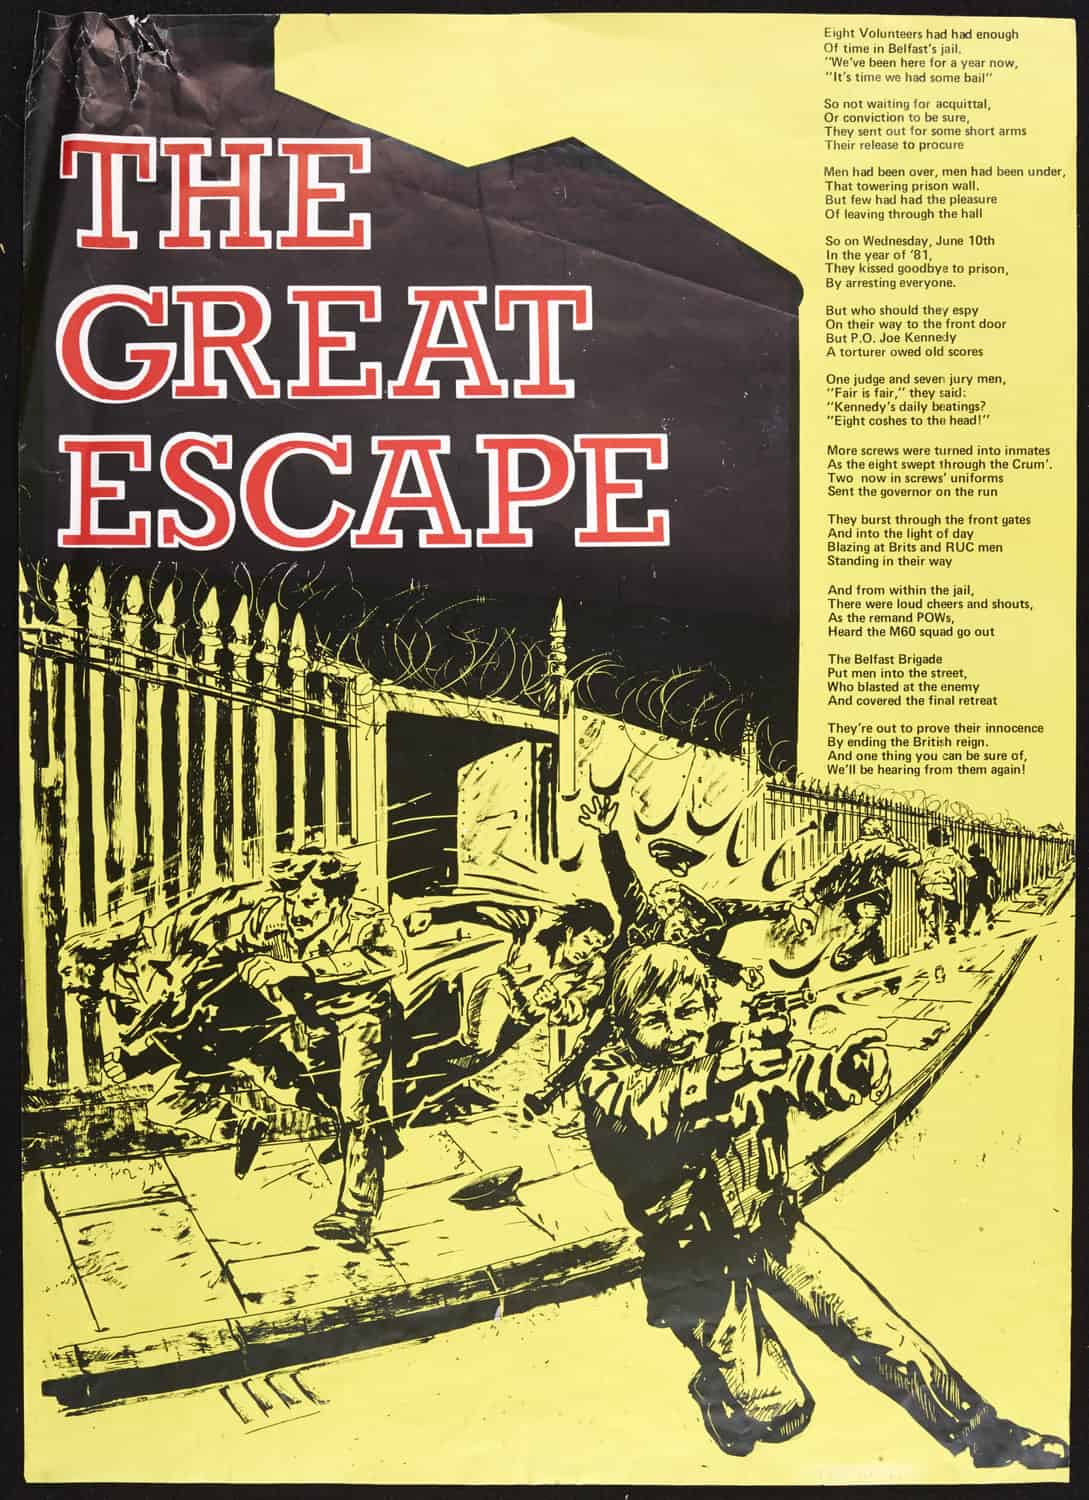 Poster detailing the escape of H-Block 7.